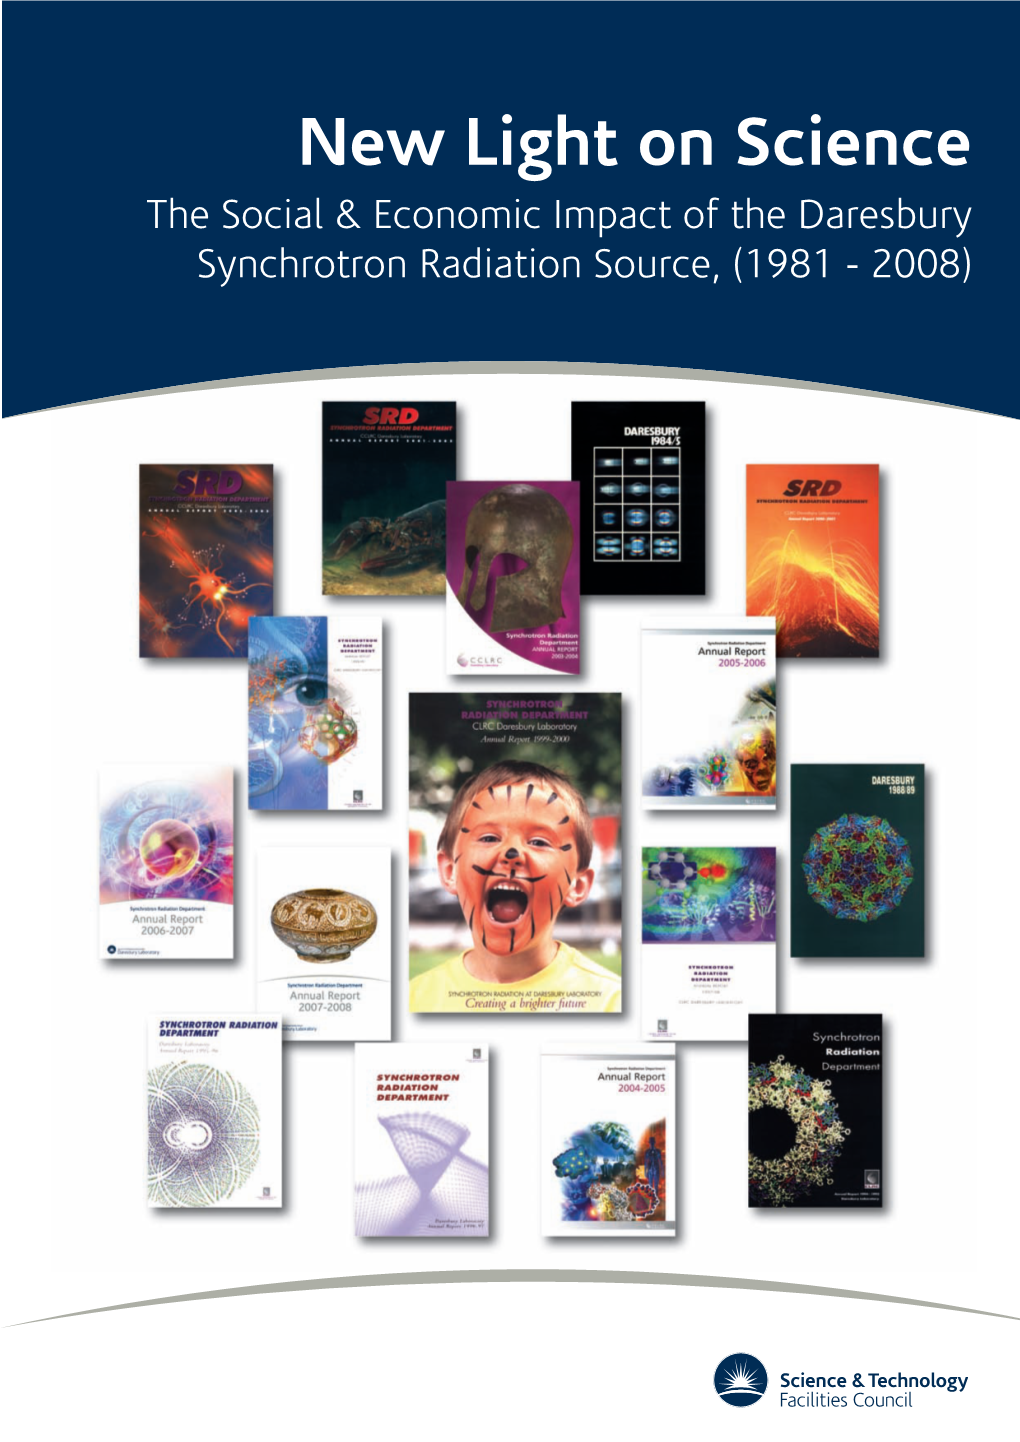 New Light on Science the Social & Economic Impact of the Daresbury Synchrotron Radiation Source, (1981 - 2008)